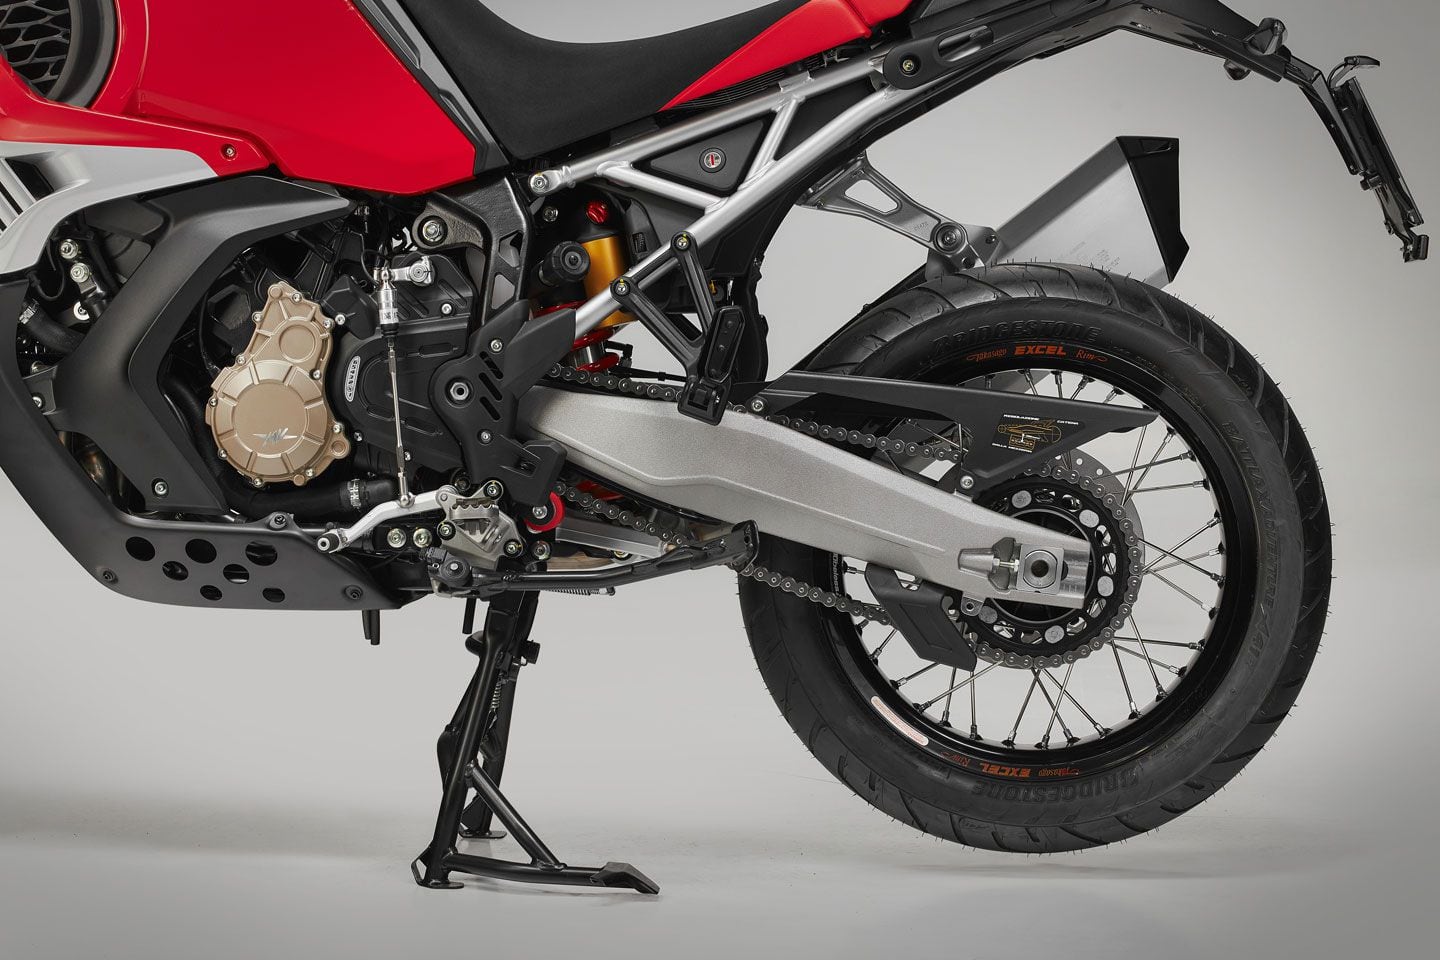 The Enduro Veloce utilizes a steel frame and aluminum swingarm. The shock’s preload can be easily changed via a large remote adjuster.